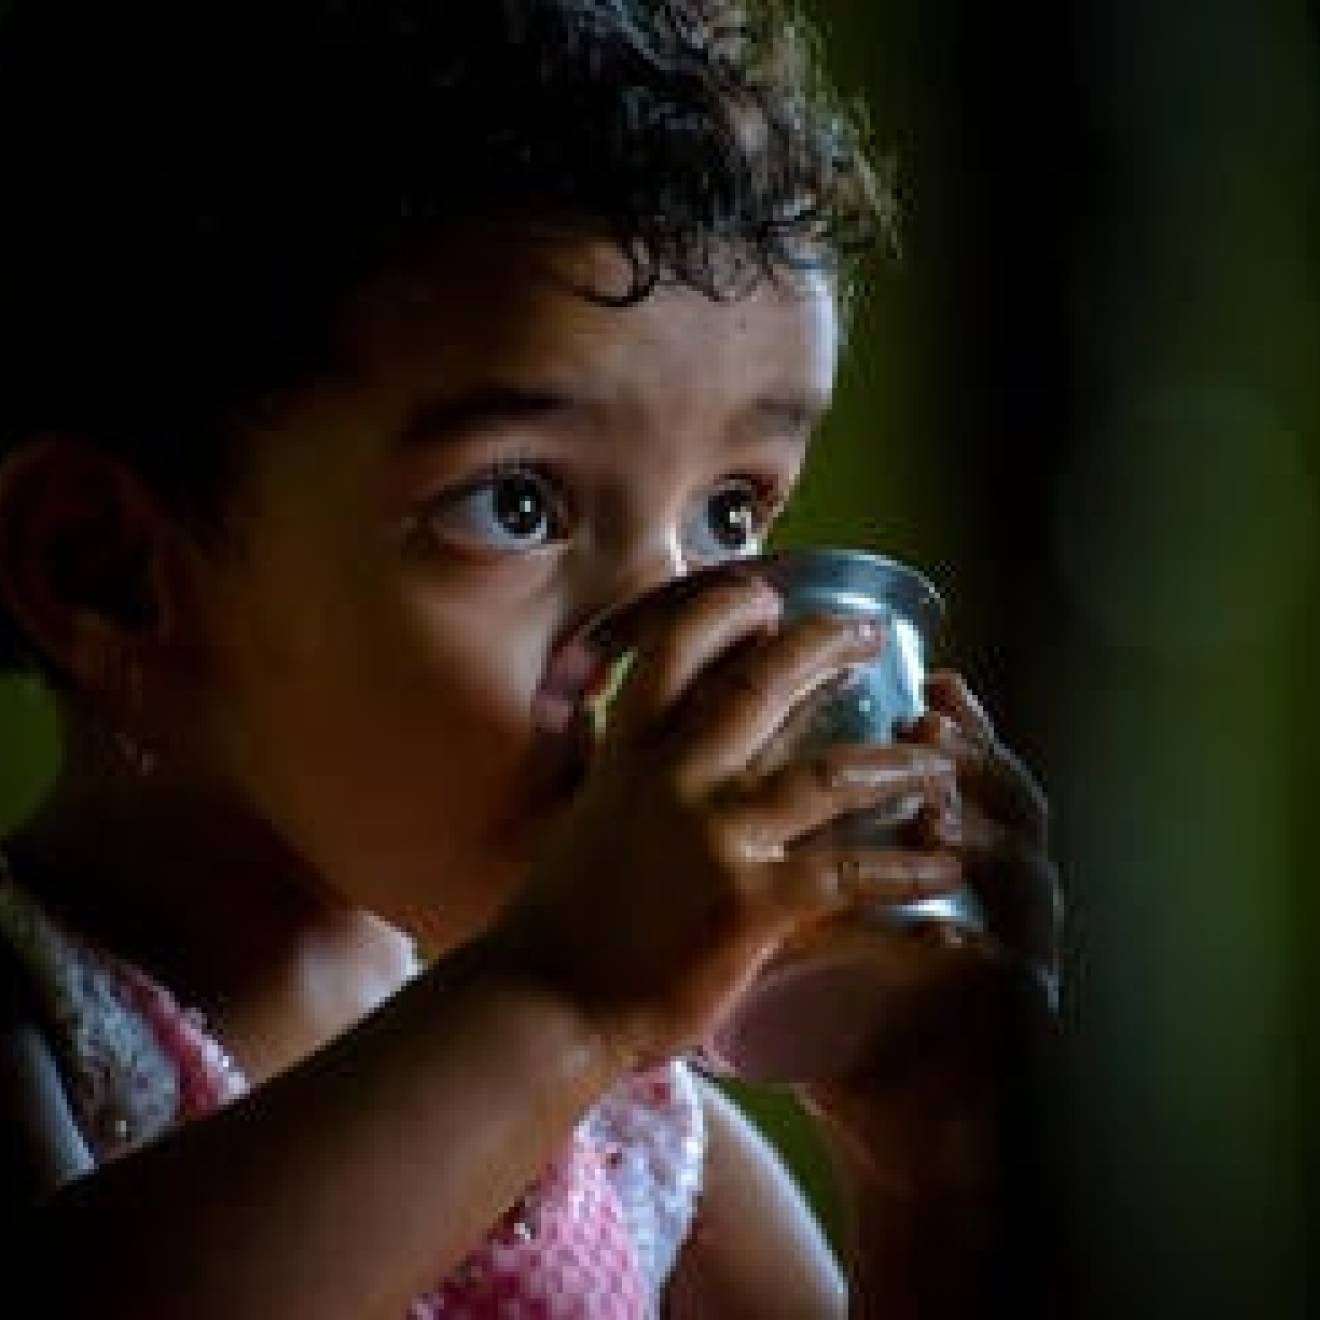 A child drinking water